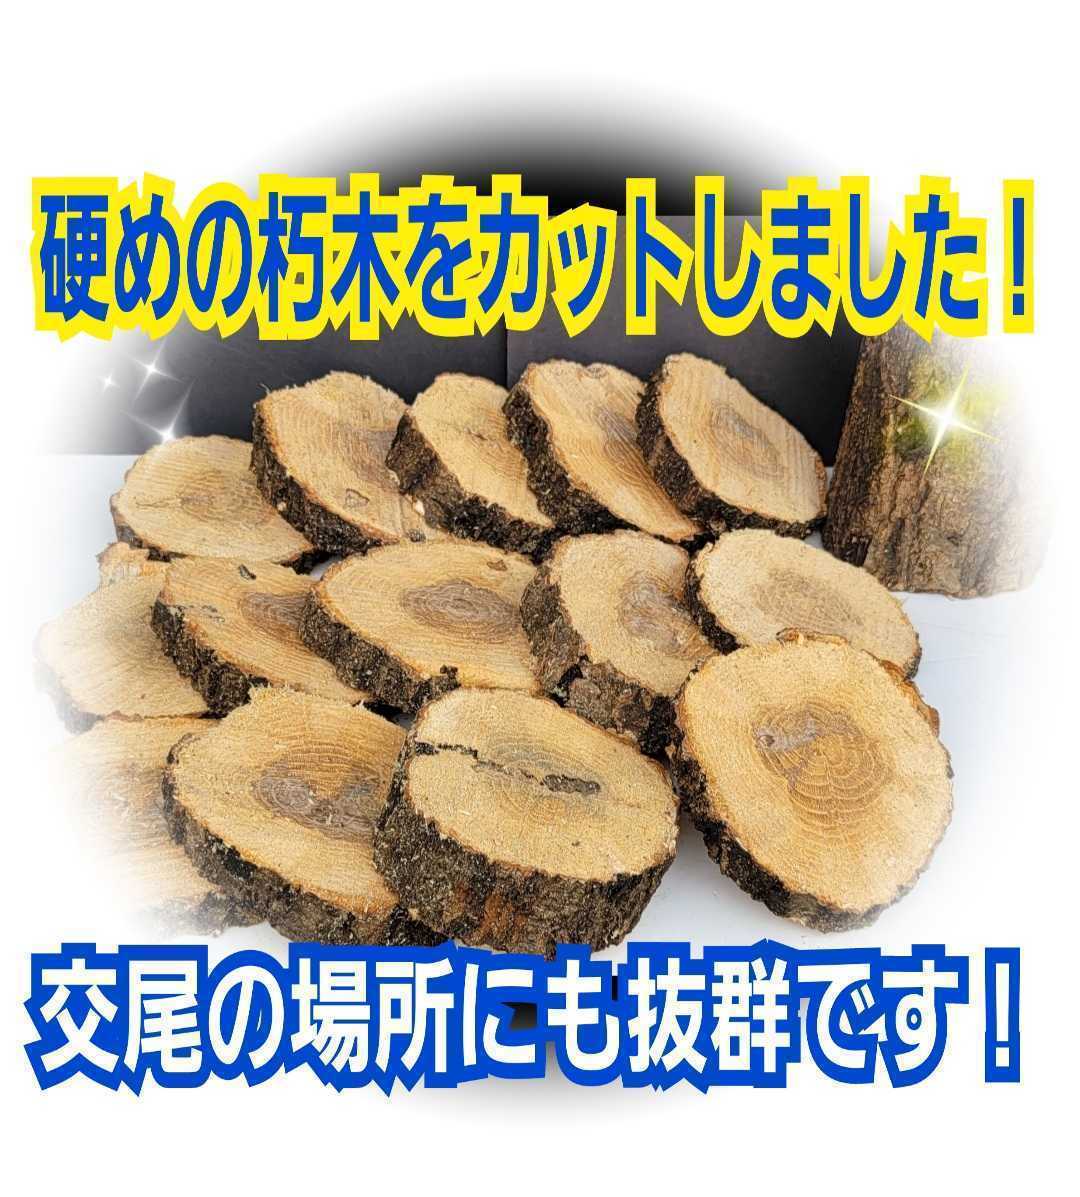  good quality! sawtooth oak, . tree. wheel cut .[5 pieces set ] rhinoceros beetle * stag beetle. . tail. place optimum! scaffold,... tree, turning-over prevention * display also eminent.!